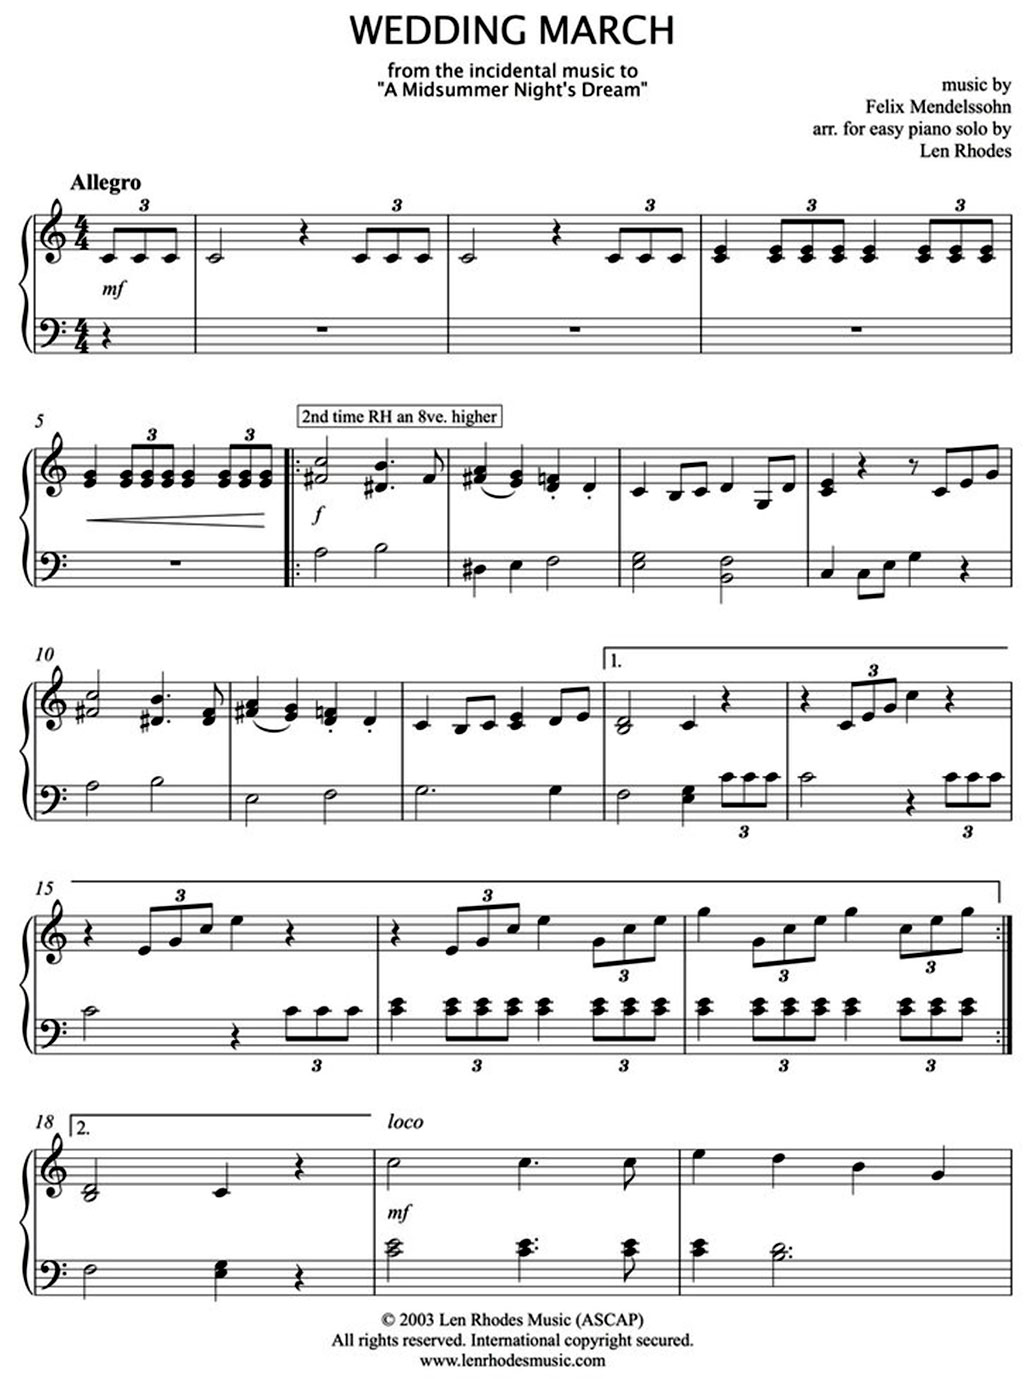 wedding march piano sheet music notes